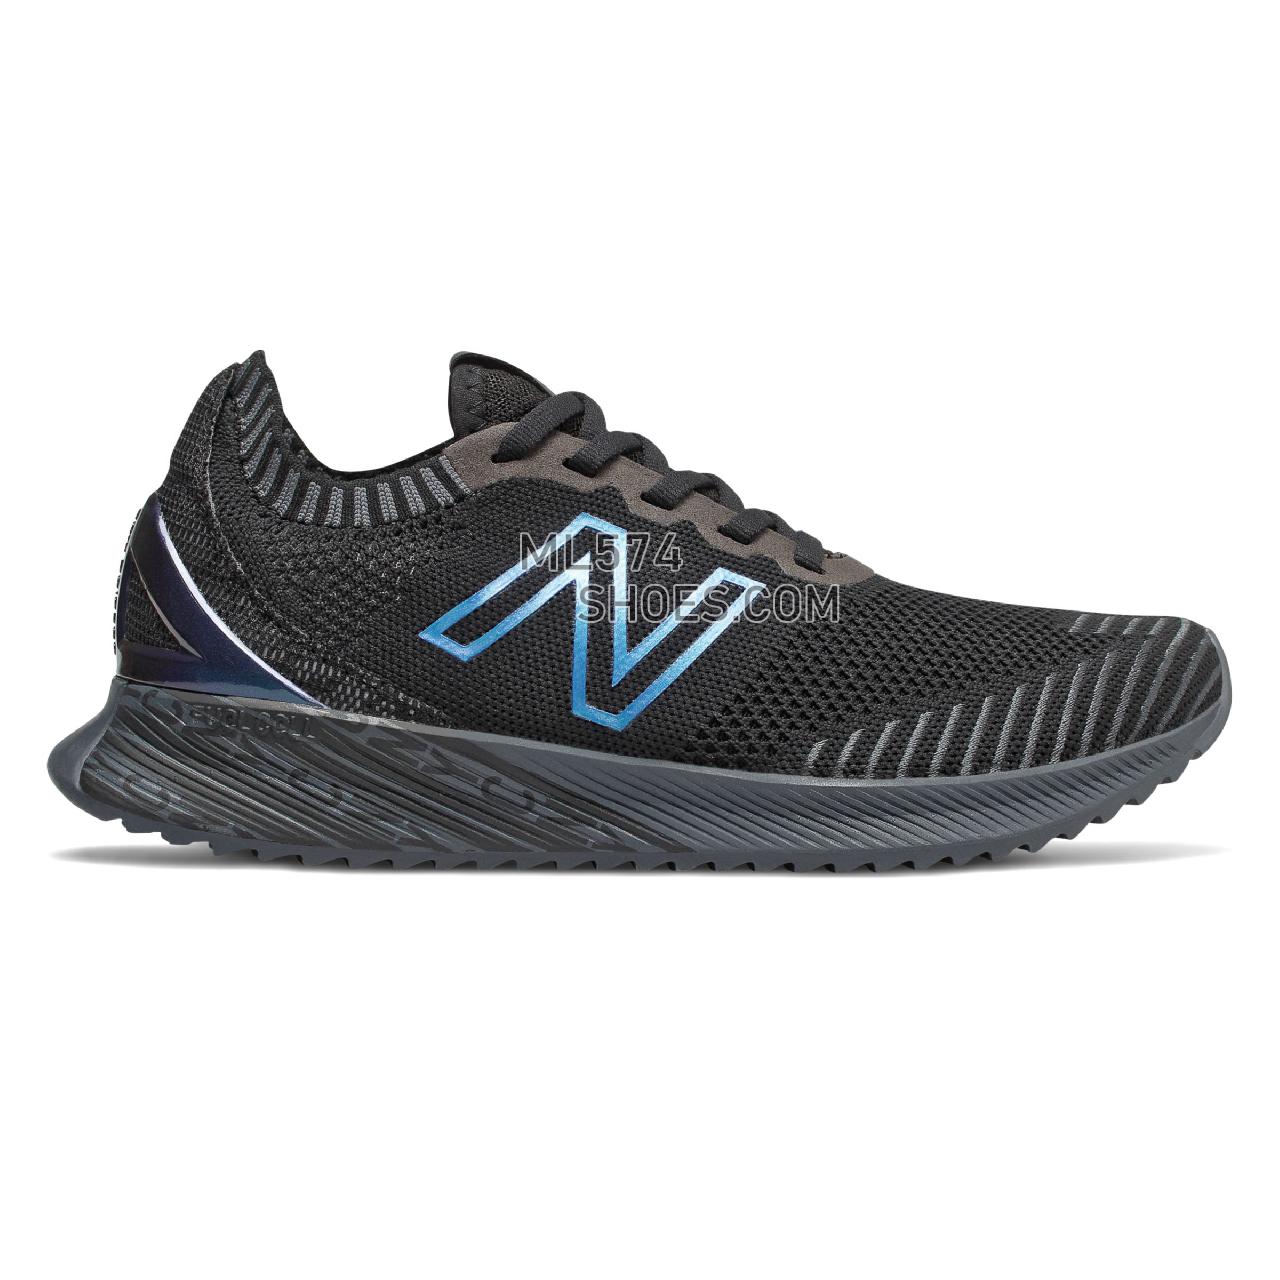 New Balance FuelCell Echo NYC Marathon - Women's Neutral Running - Black with Orca - WFCECNY